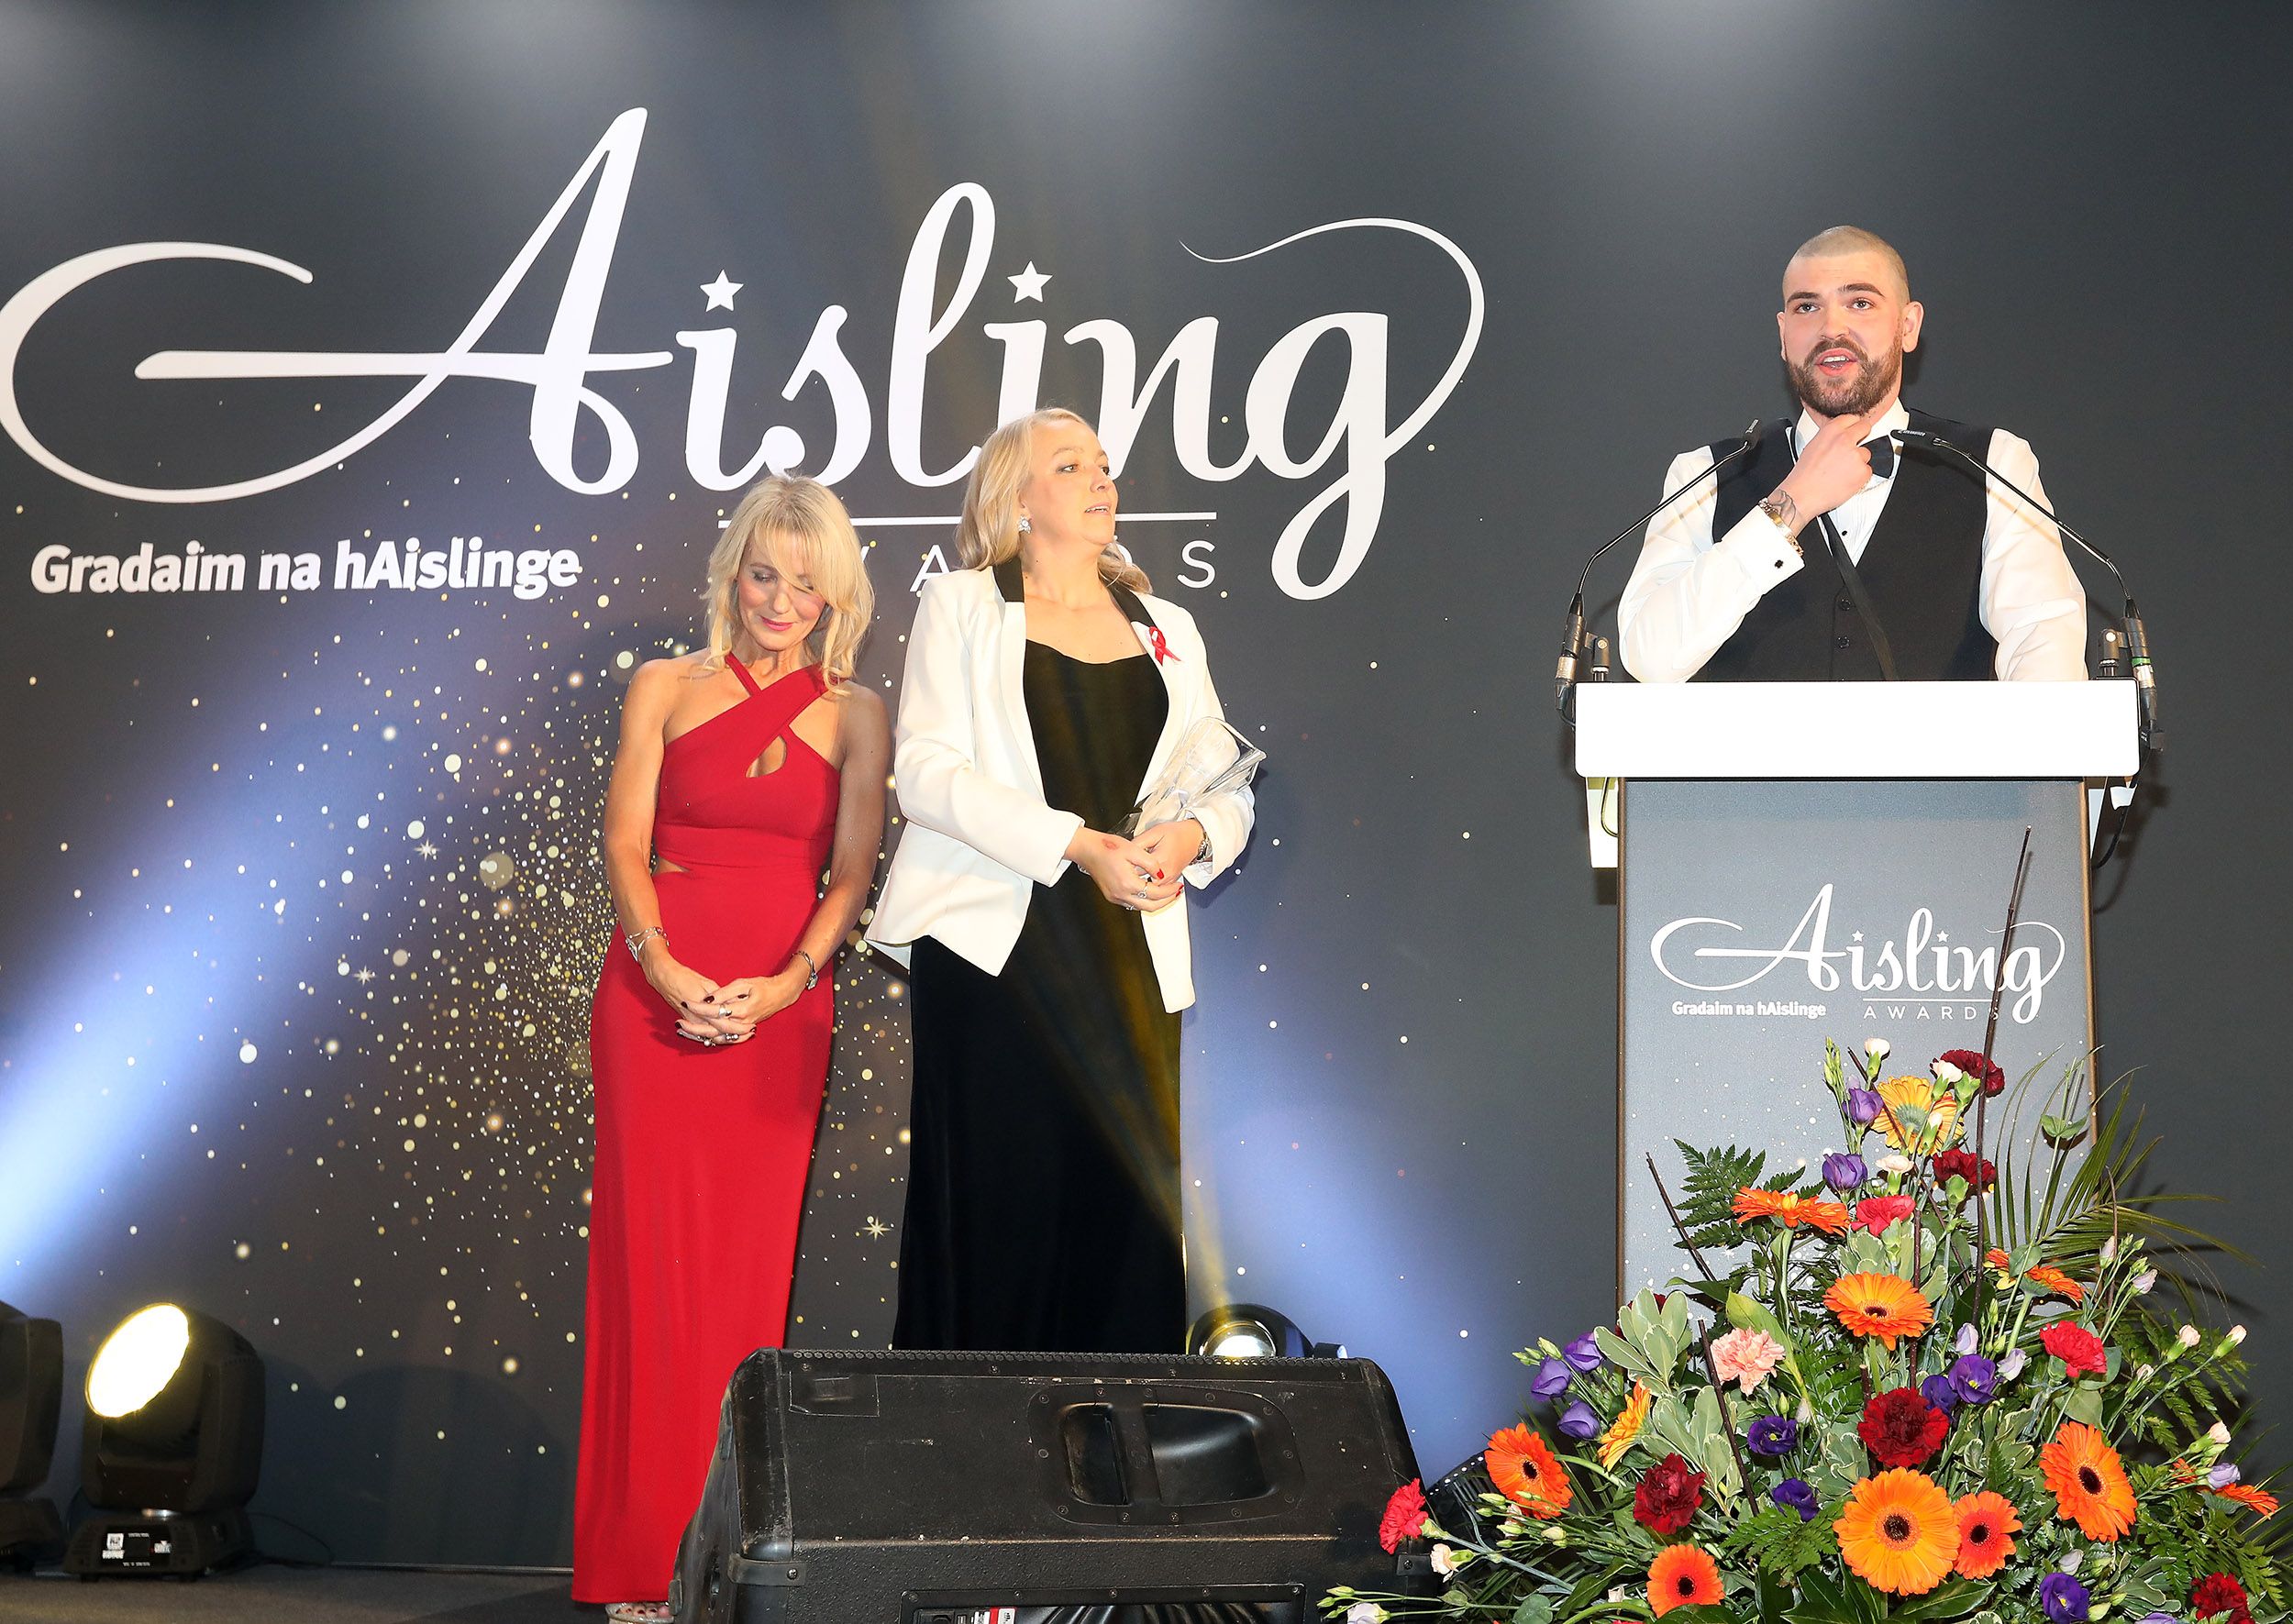 HIGHLIGHT: South Belfast Youth Action Partnership accept the 2019 Urban Villages Aisling Award